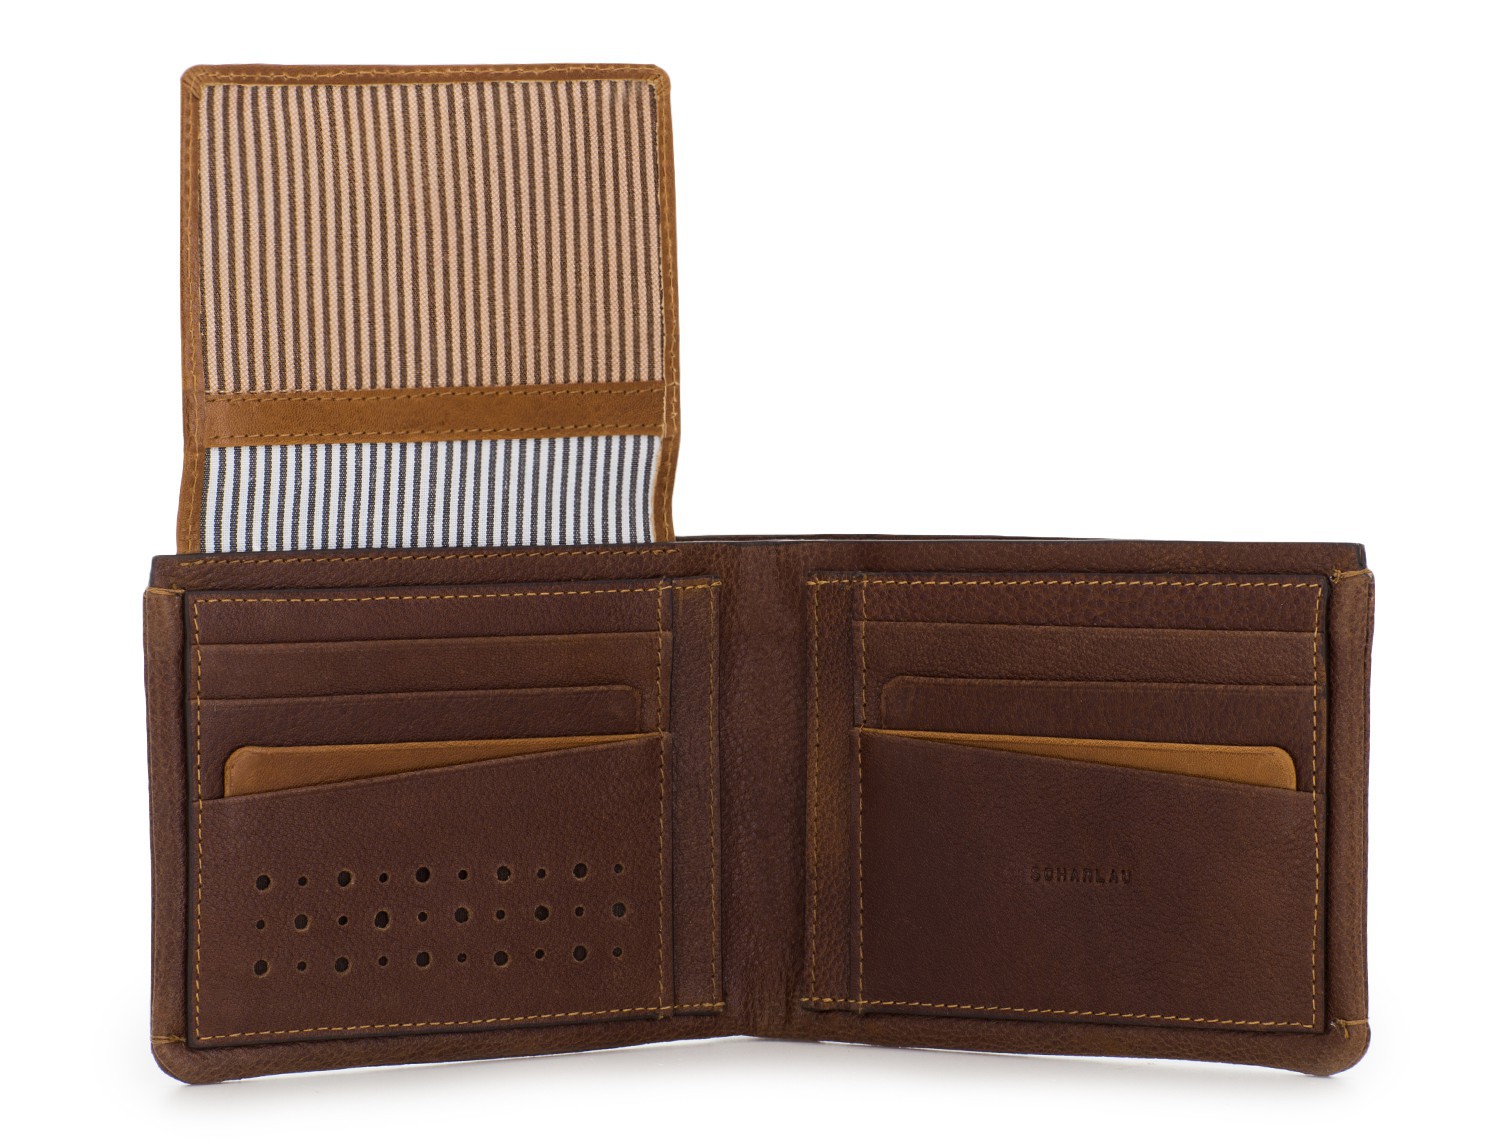 leather wallet with card holder brown open